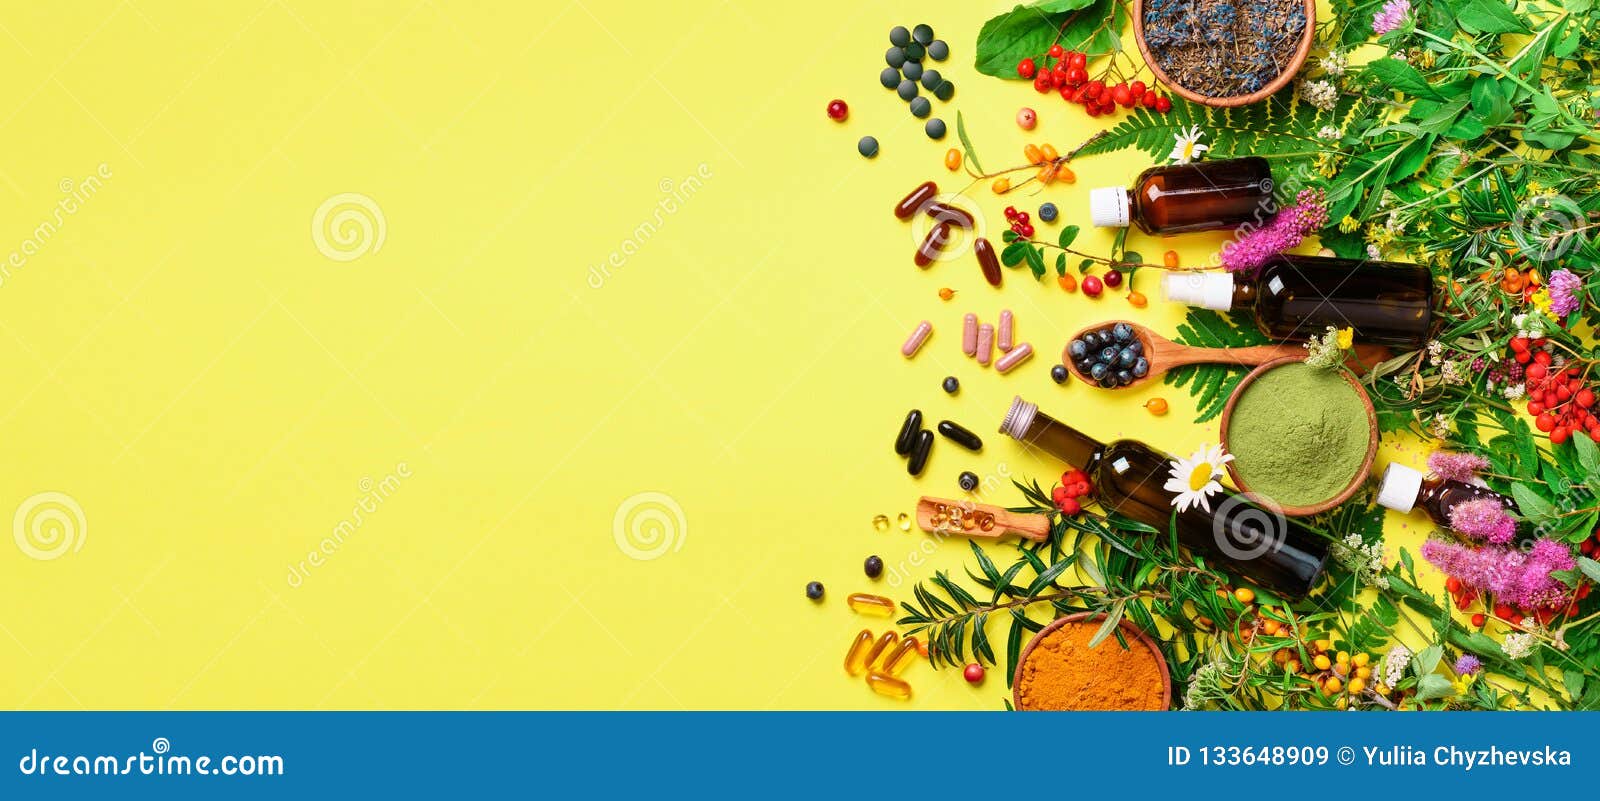 holistic medicine approach. healthy food eating, dietary supplements, healing herbs and flowers. turmeric, dried lavender,